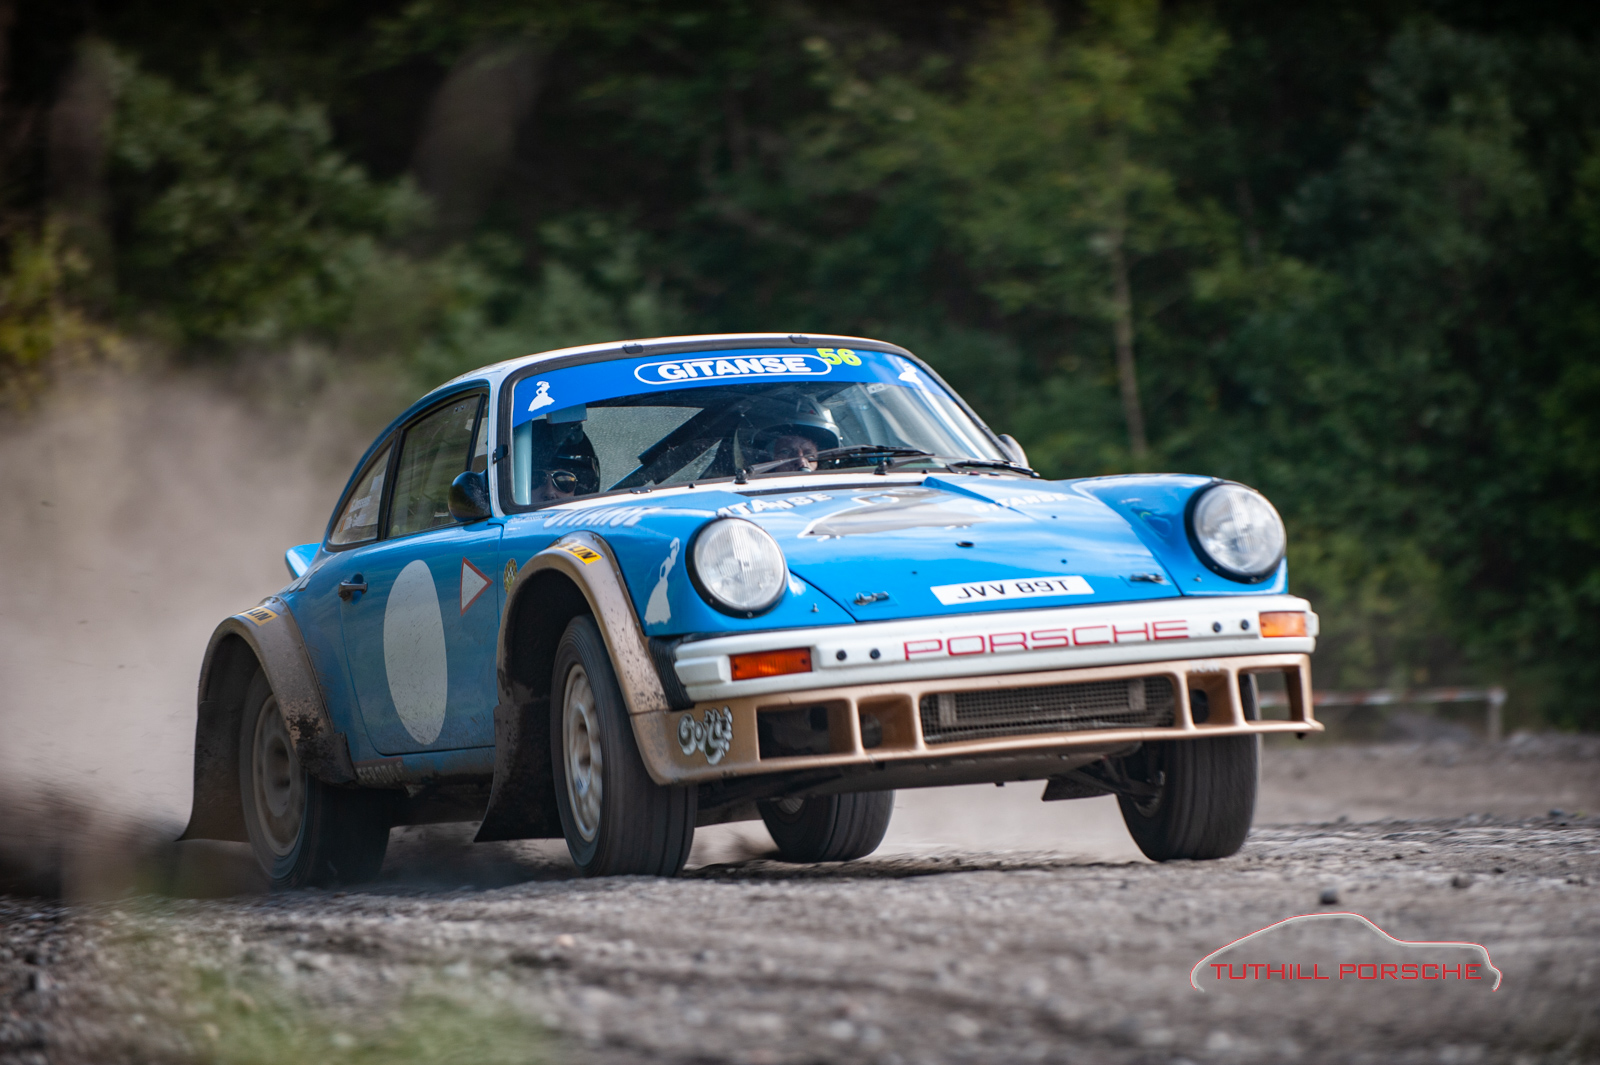 Tuthill Porsche tests for 2018 Wales Rally GB